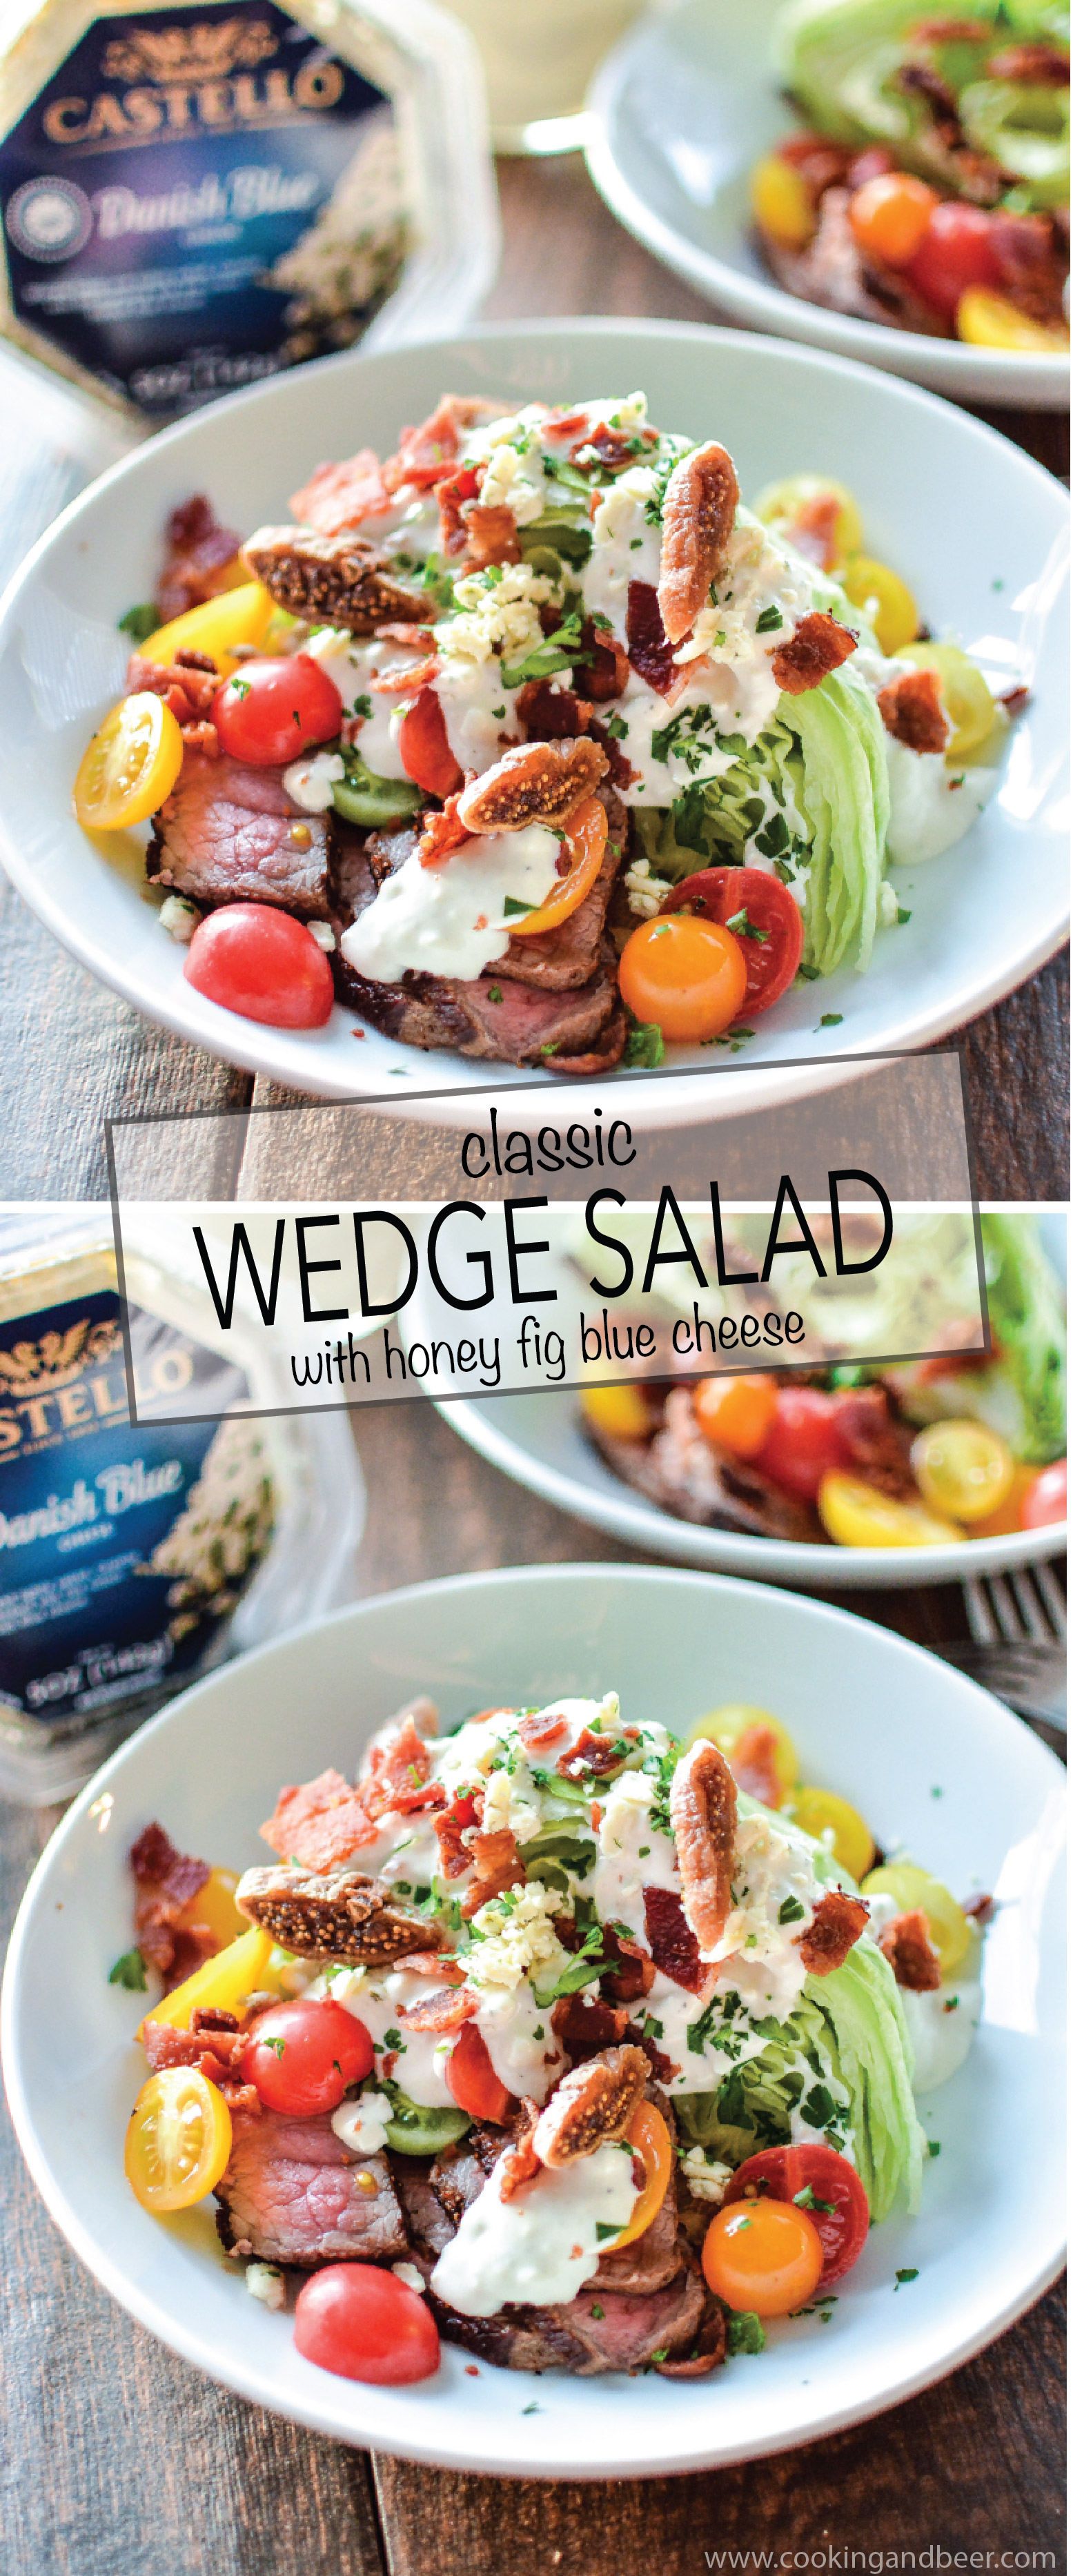 Classic Wedge Salad with Warm Honey Fig Blue Cheese is your go to summer salad recipe to keep things light and refreshing! #BluesdayTuesday | www.cookingandbeer.com